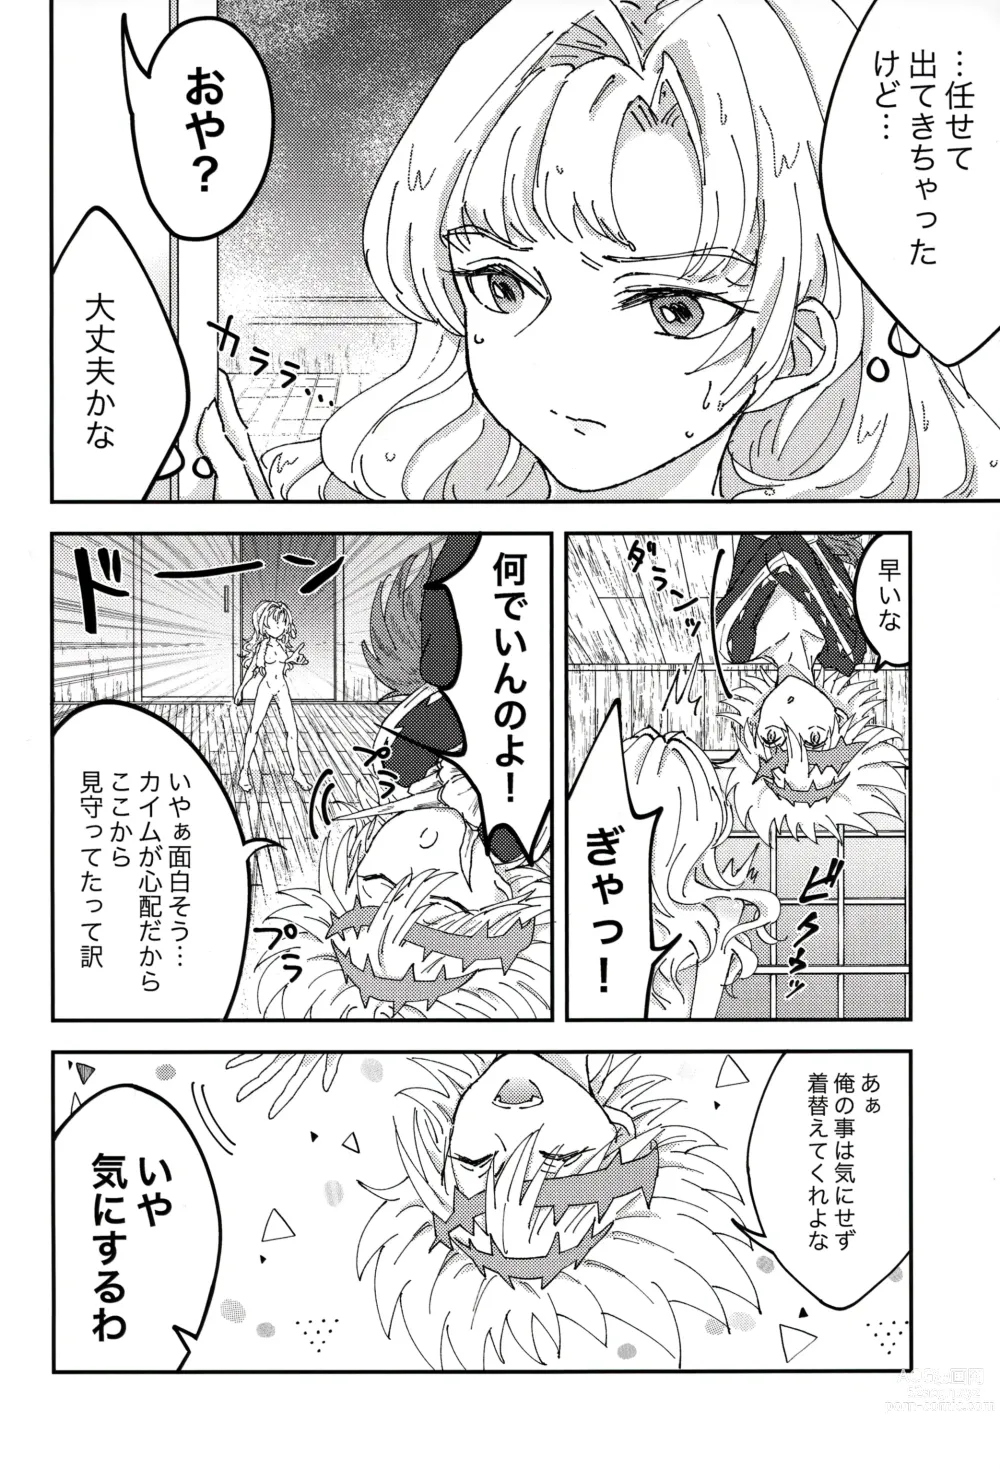 Page 5 of doujinshi SOAP TRICK!